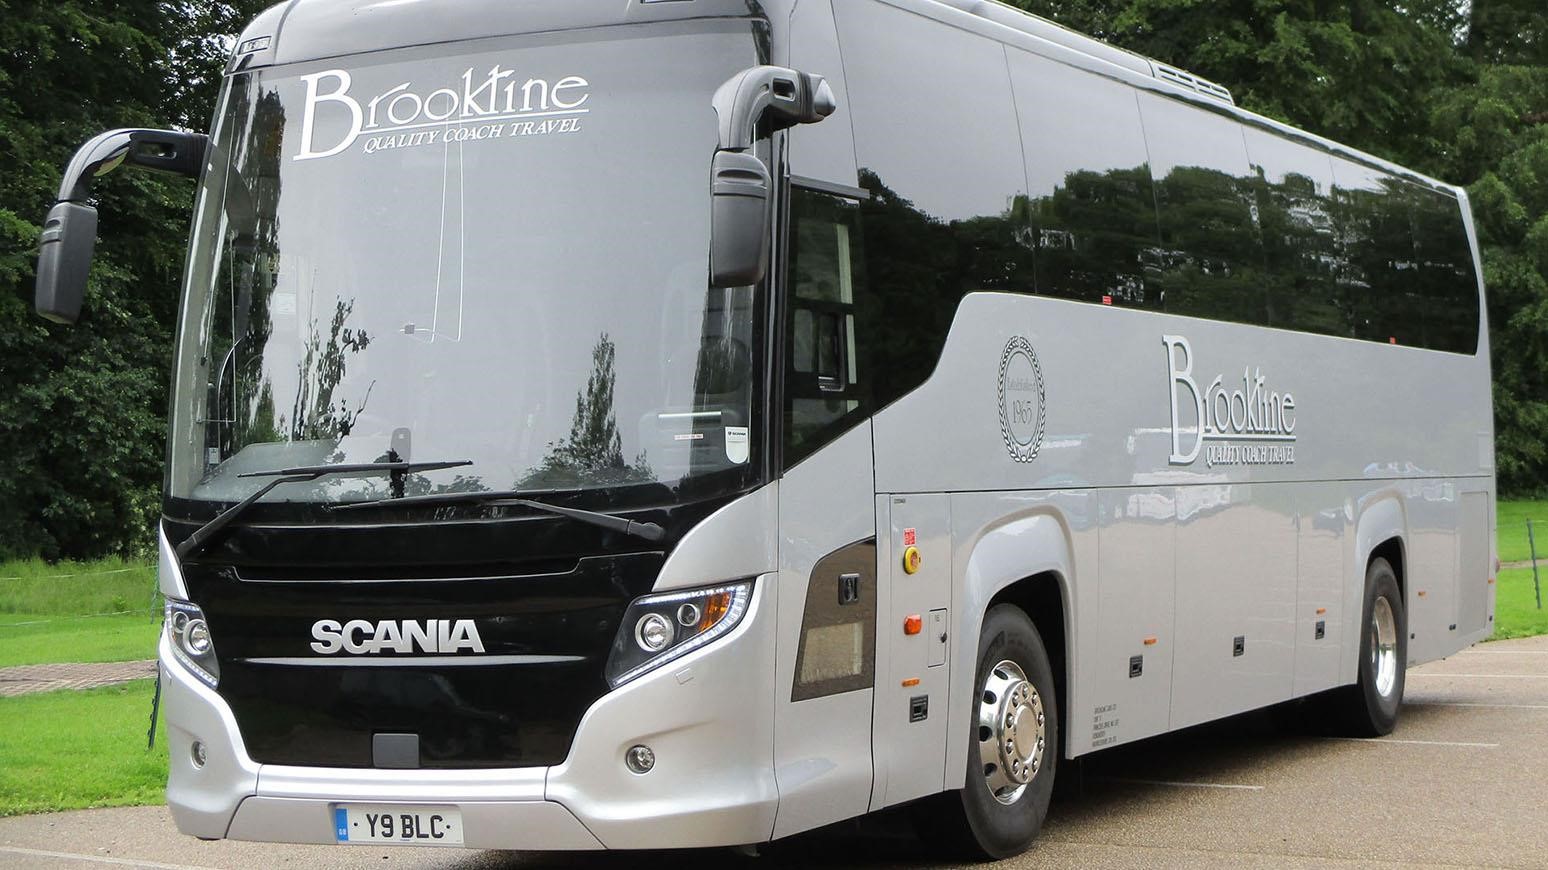 Scania Introduces New 10.9-Metre Touring HD Coach With Maximum Capacity Of 45 Seats